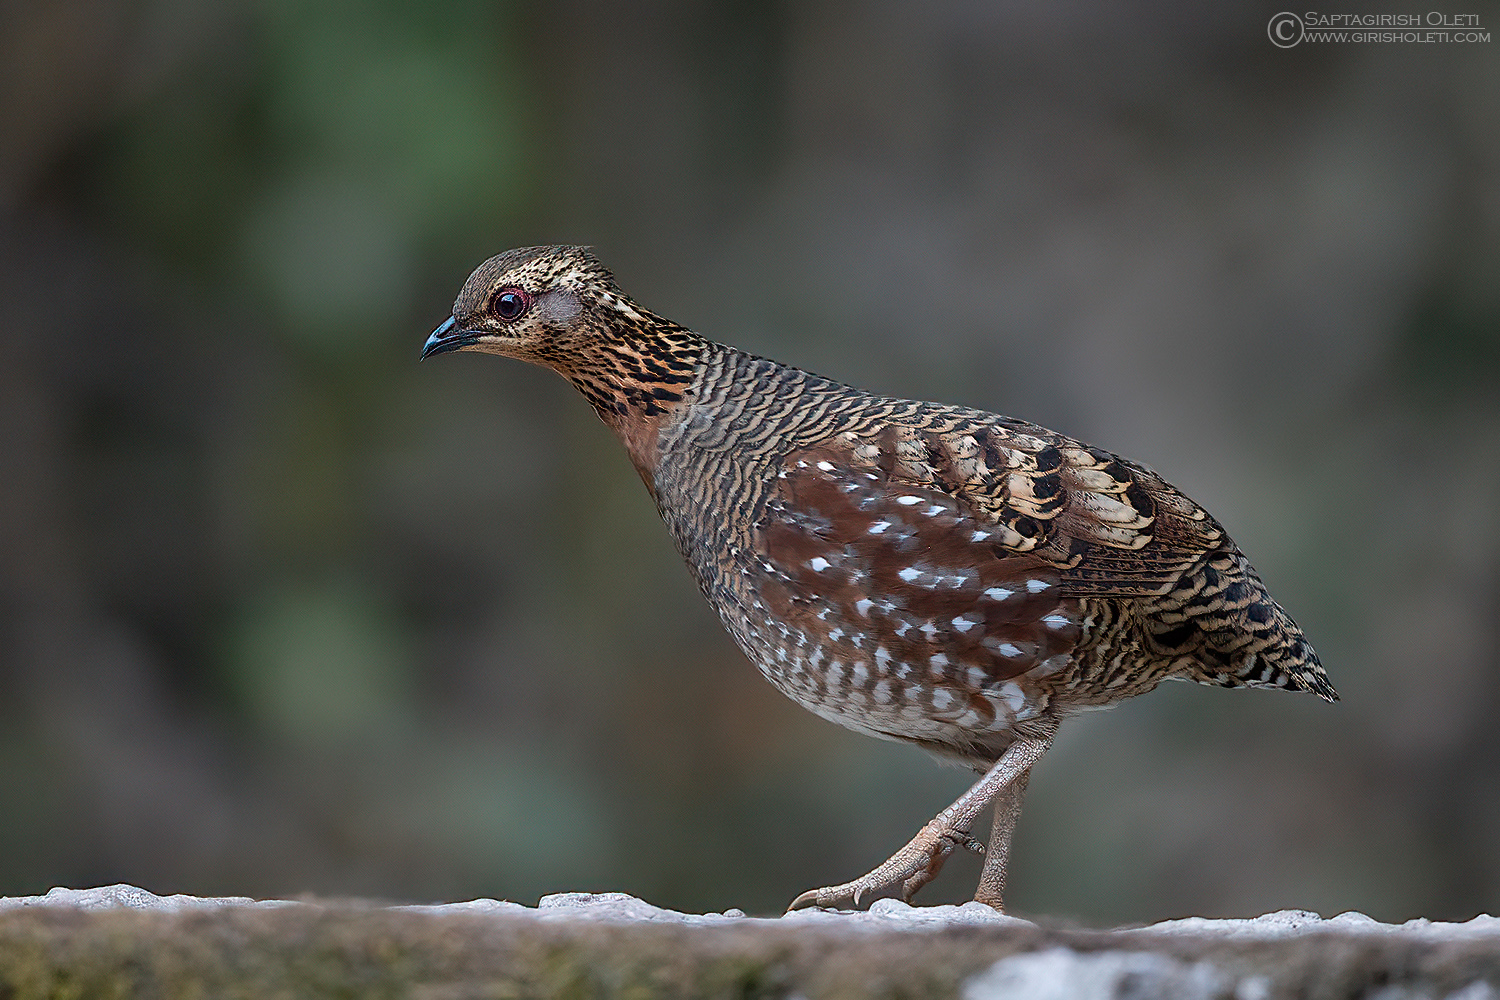 Common Hill-partridge photographed at Tiger hills, Darjeeling